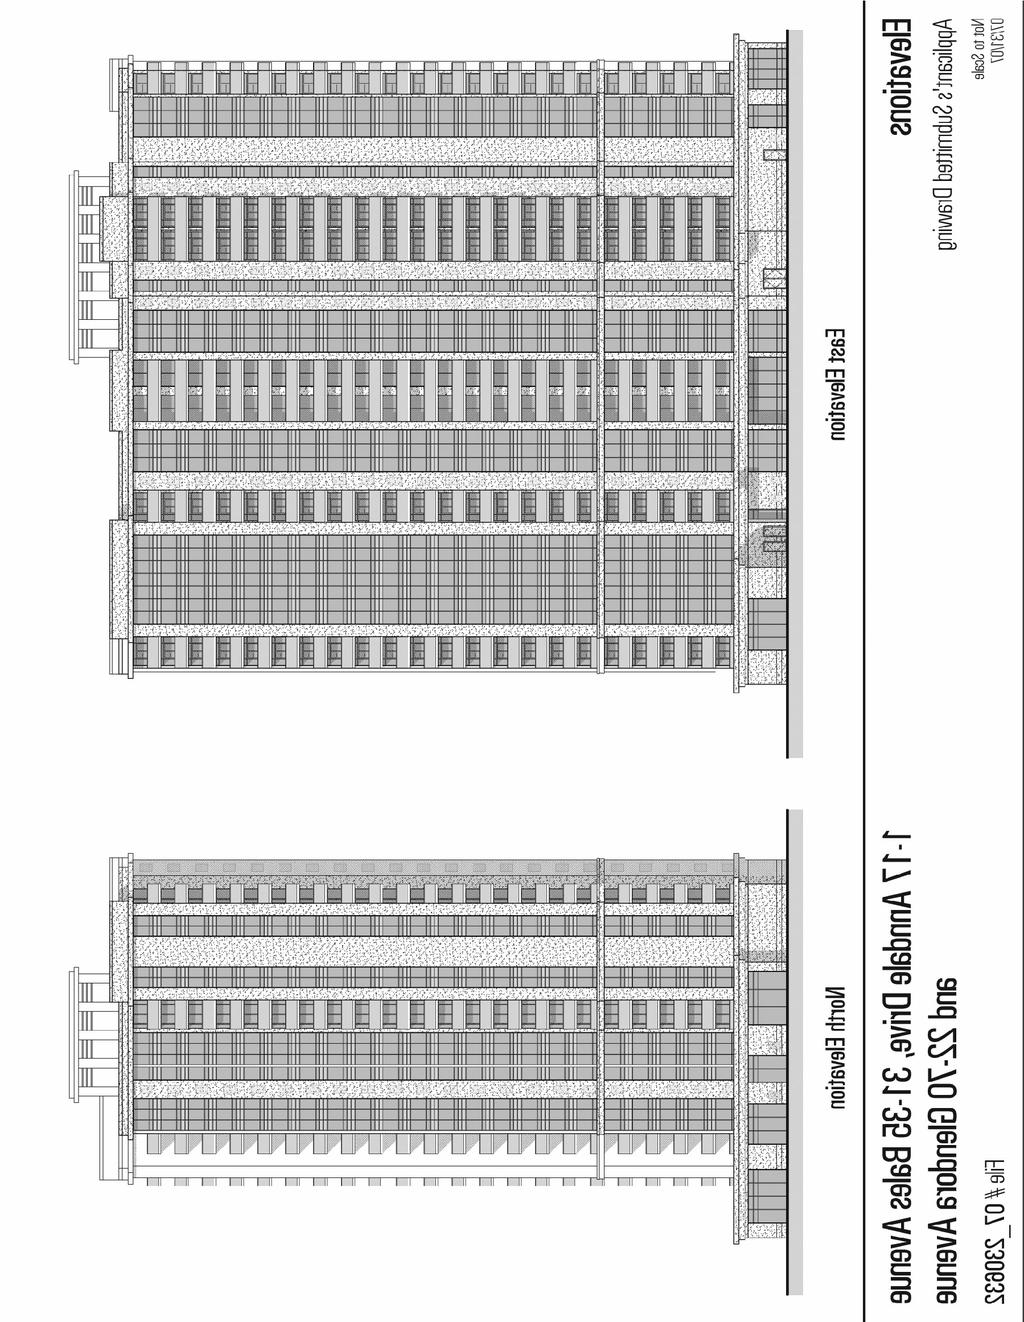 Attachment 2a: North and East Tower Elevations Staff report for